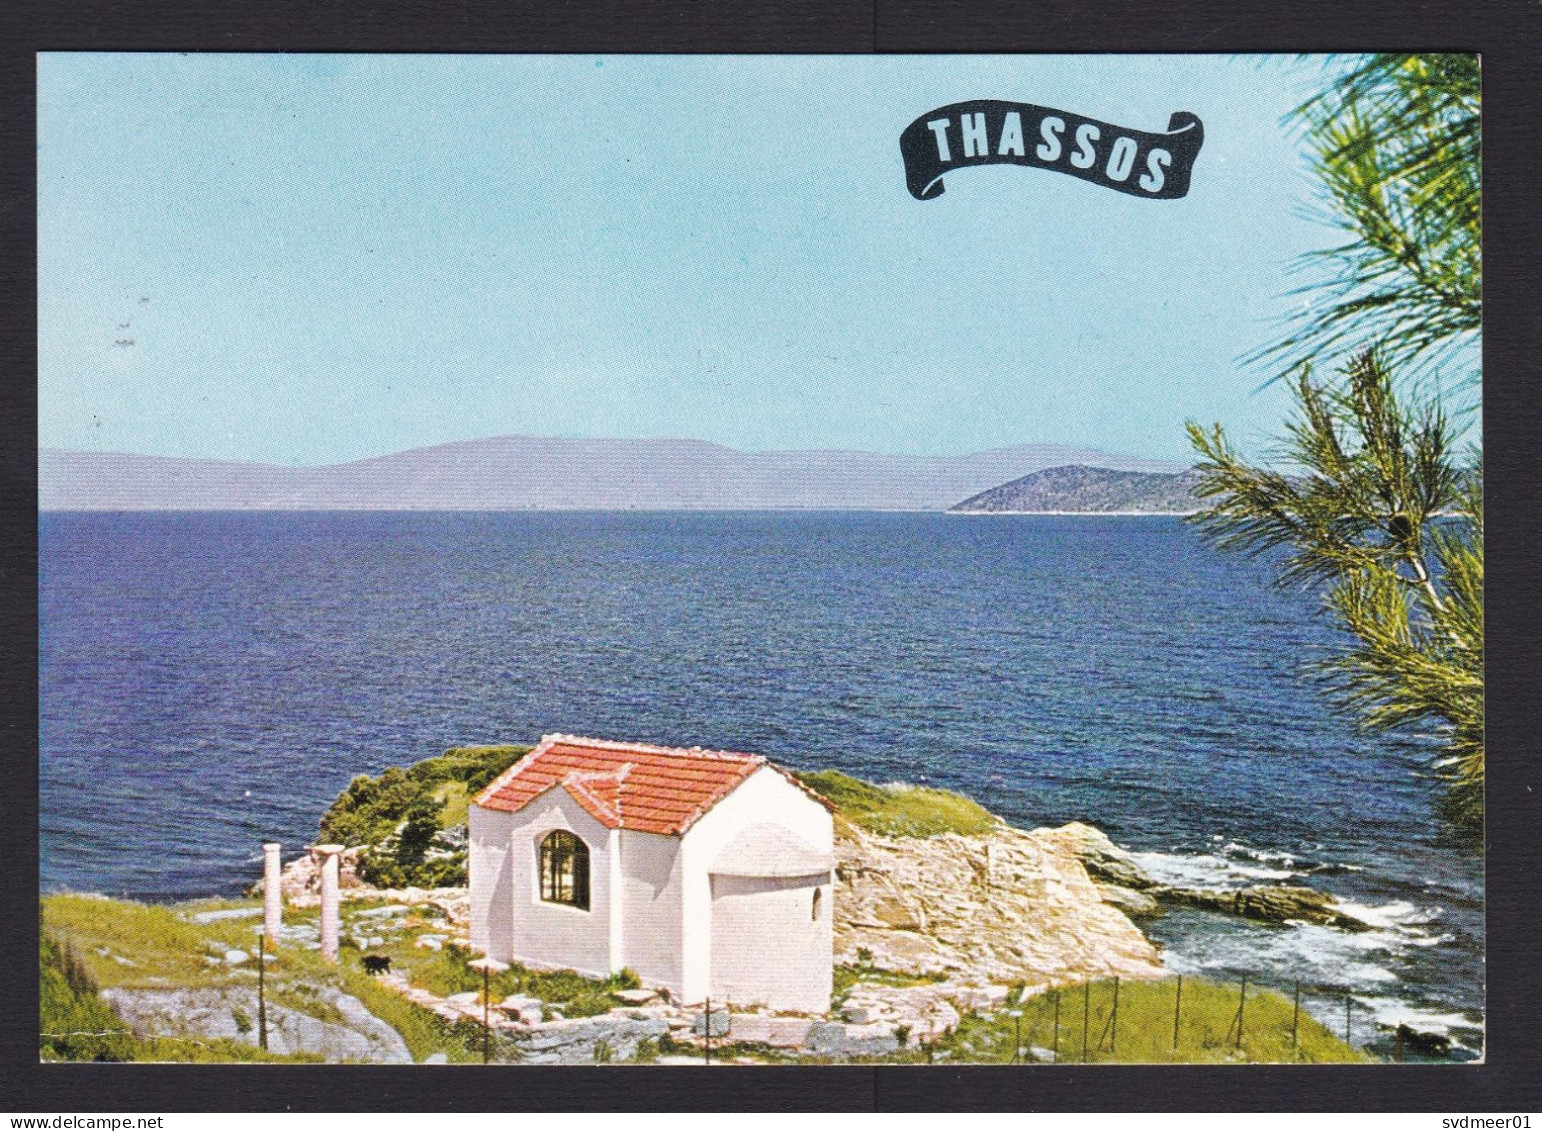 Greece: Picture Postcard To Netherlands, 2000s, 2 Stamps, Firefighter Airplane, Fire, Rainbow, Thassos (traces Of Use) - Covers & Documents